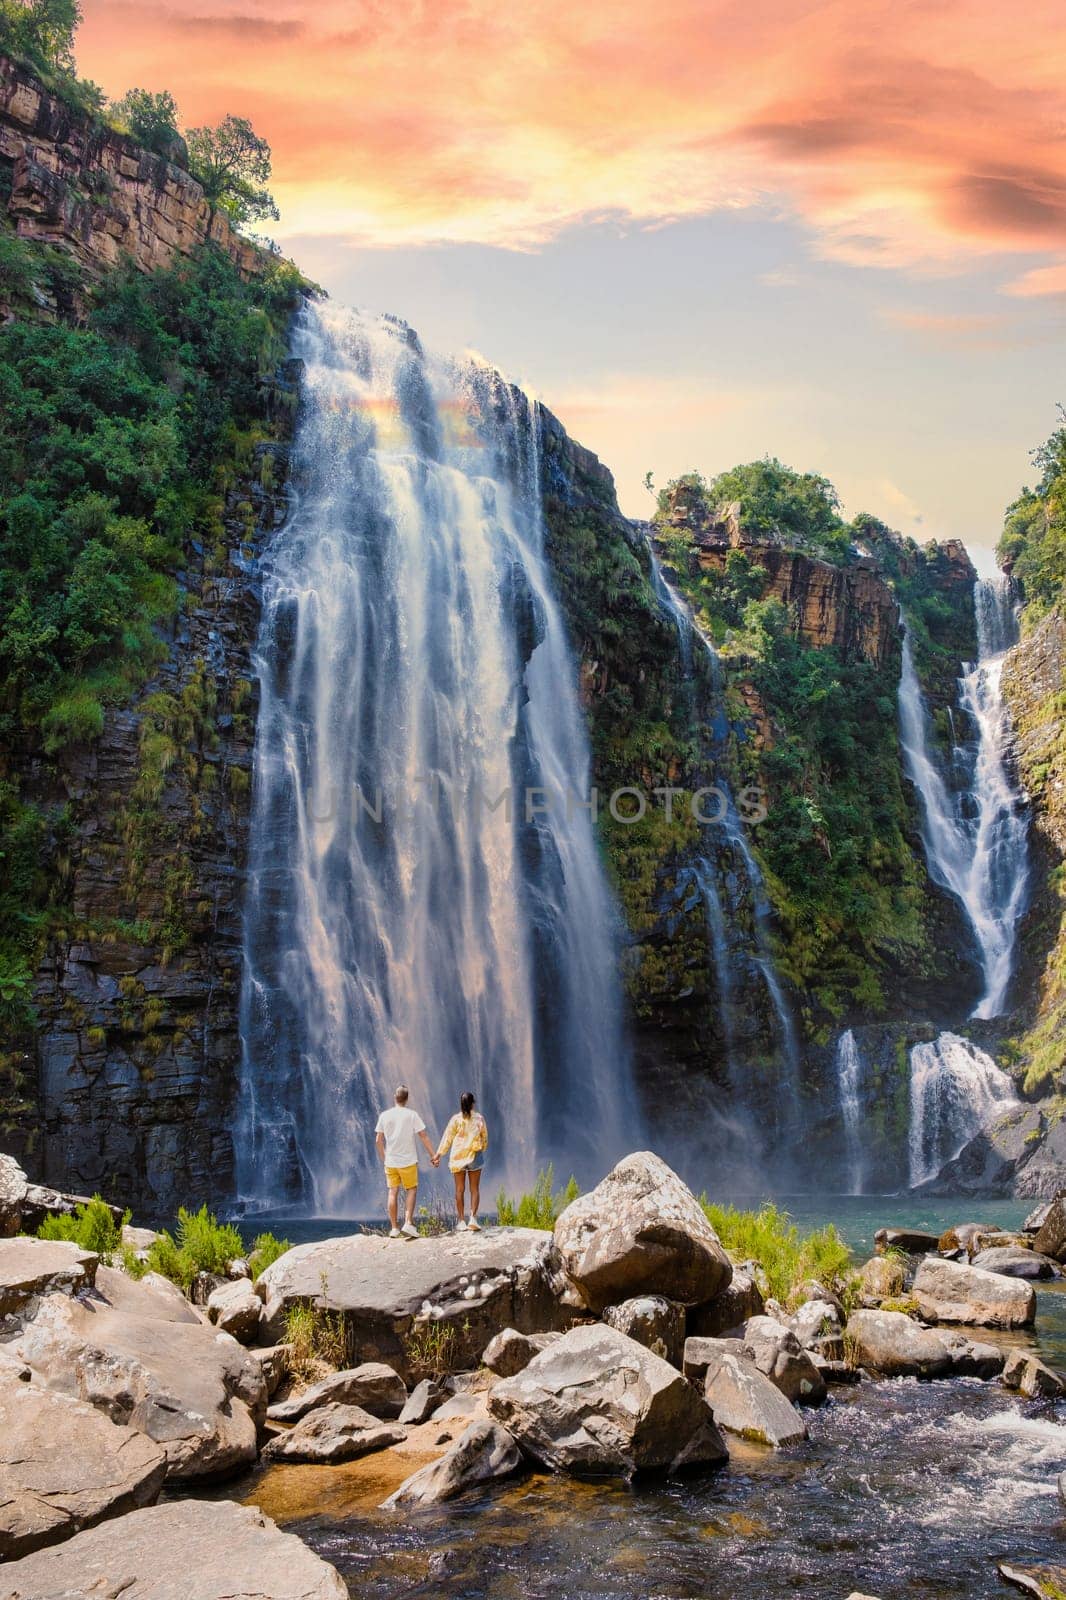 Asian women and caucasian men on vacation in South Africa visit the Panorama Route South Africa, Lisbon Falls South Africa, Lisbon Falls is the highest waterfall in Mpumalanga, South Africa.